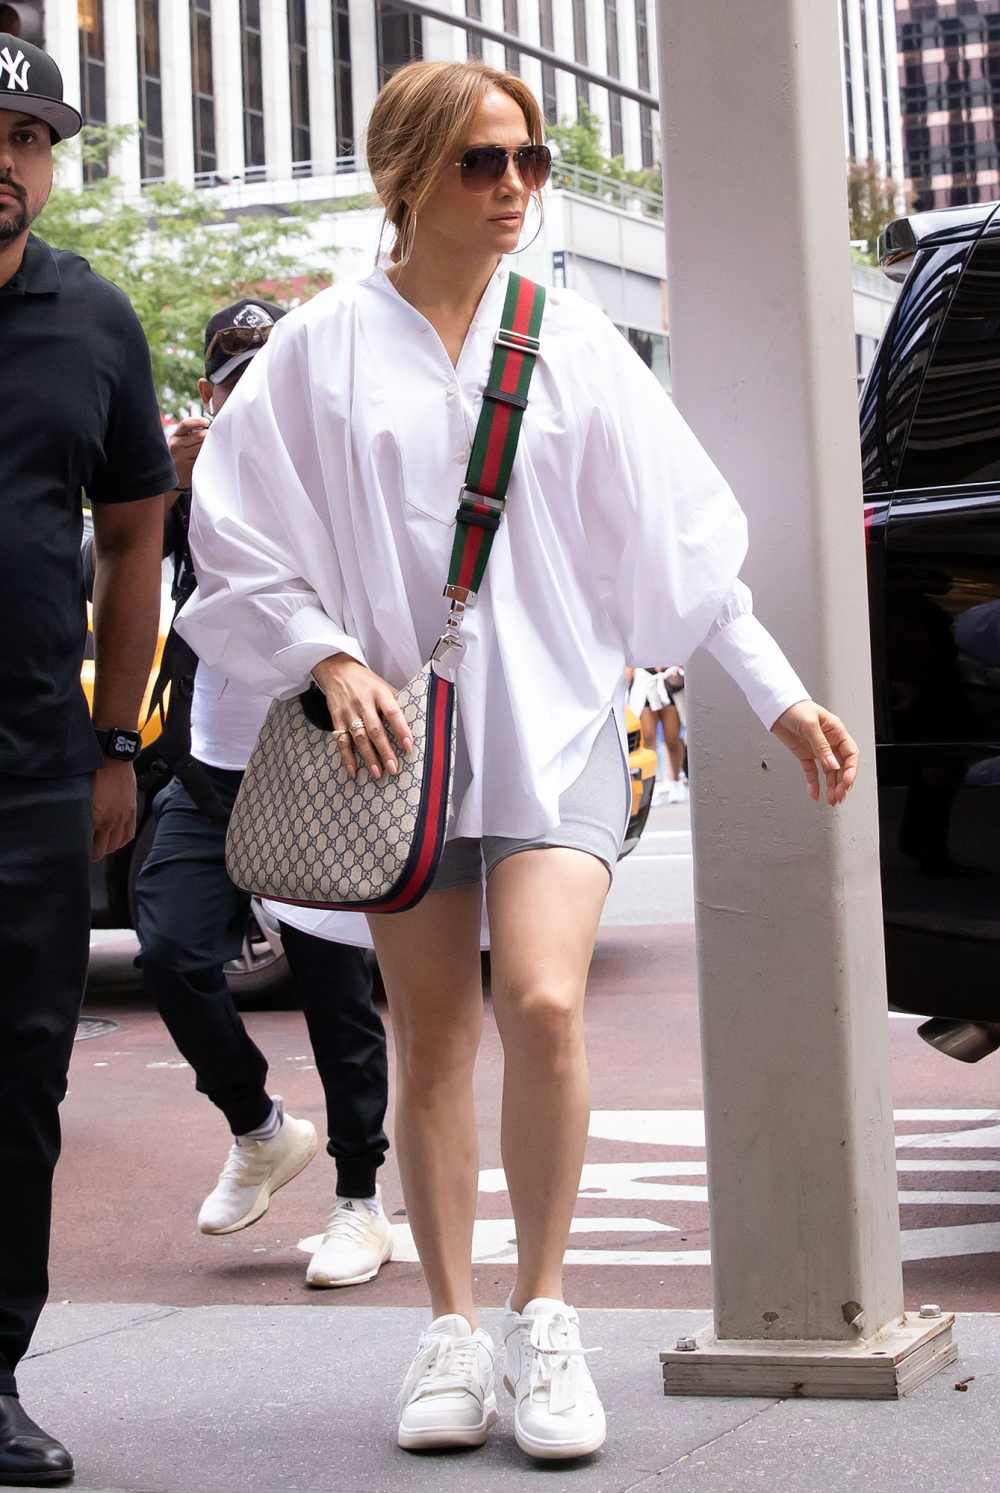 Jennifer Lopez Nails Off-Duty Style in an Oversized Button Up and Denim Shorts